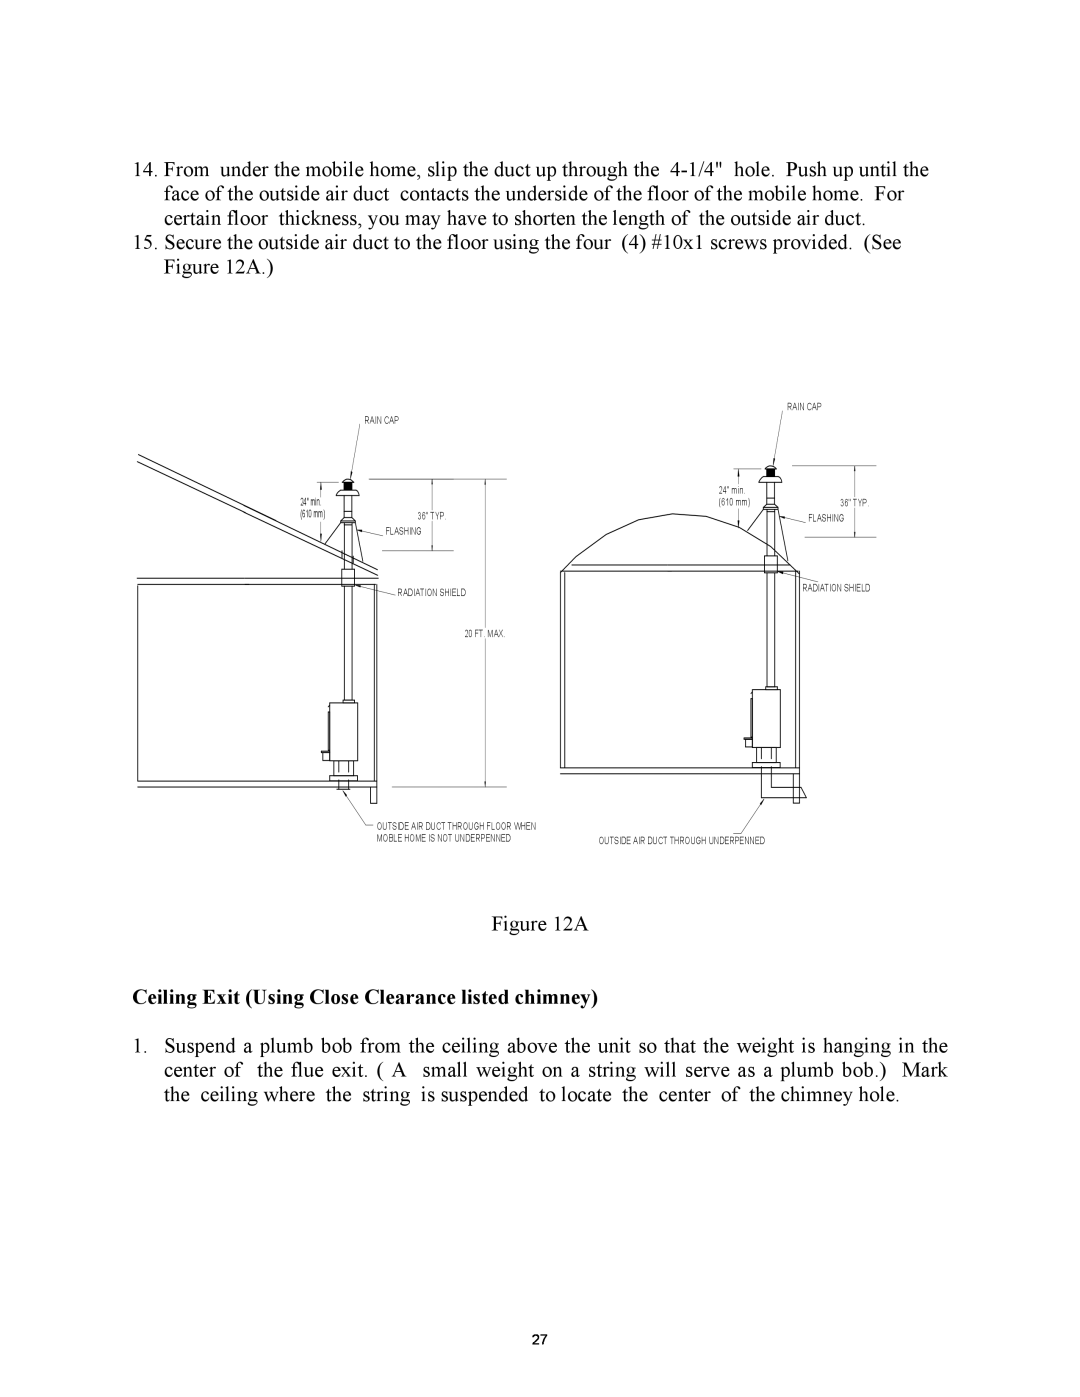 New Buck Corporation 74 installation instructions Ceiling Exit Using Close Clearance listed chimney 